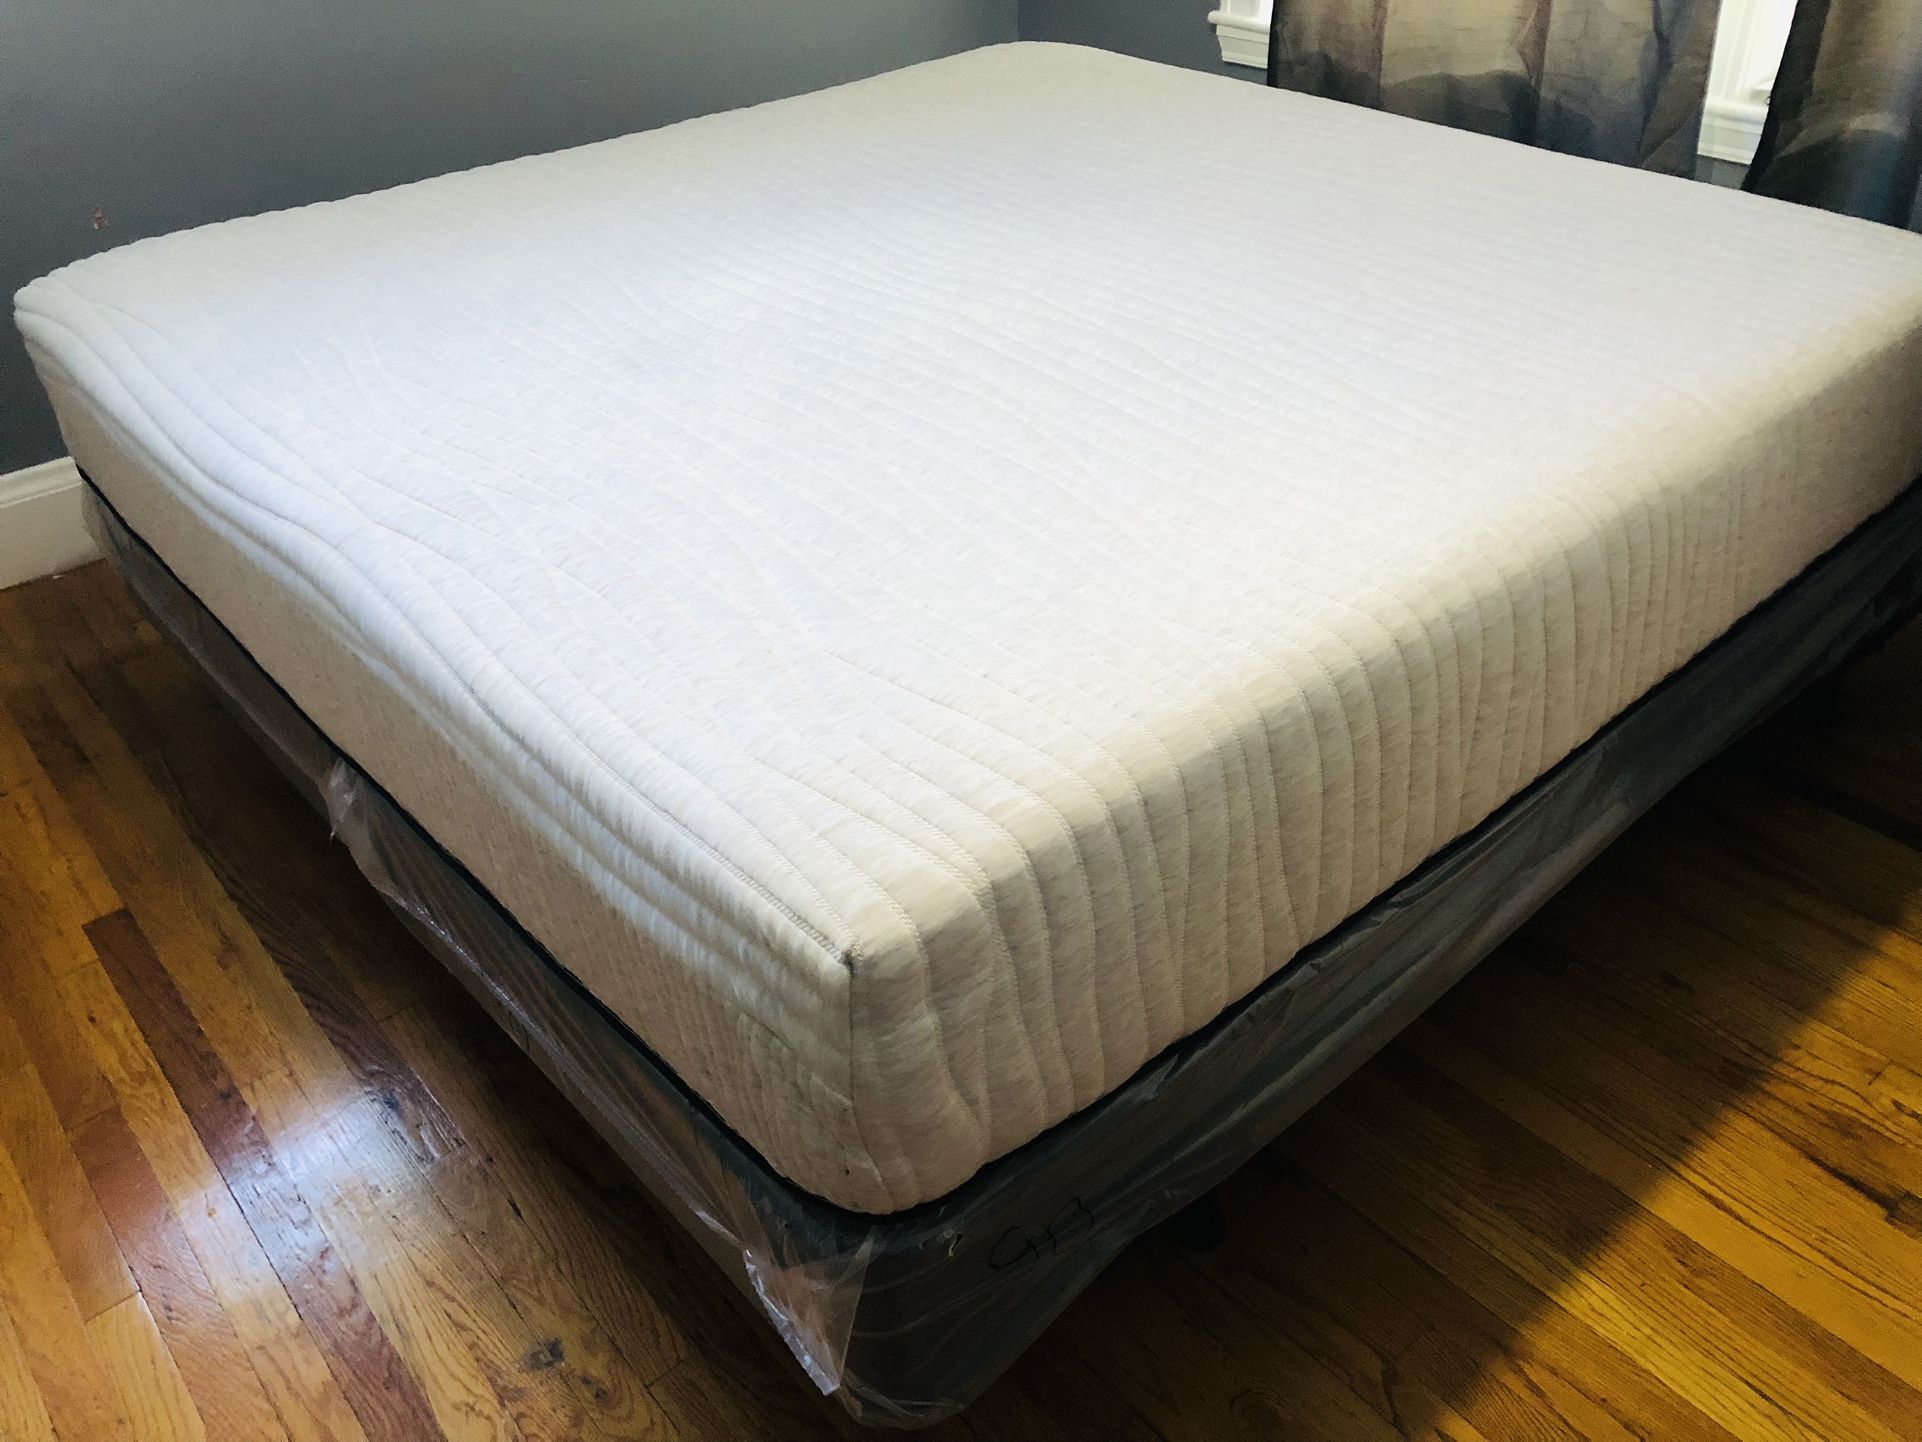 MATTRESS+BOX King size Memory Foam Gel 12”thick Comfortable+Quality Brand New We Finance We Deliver